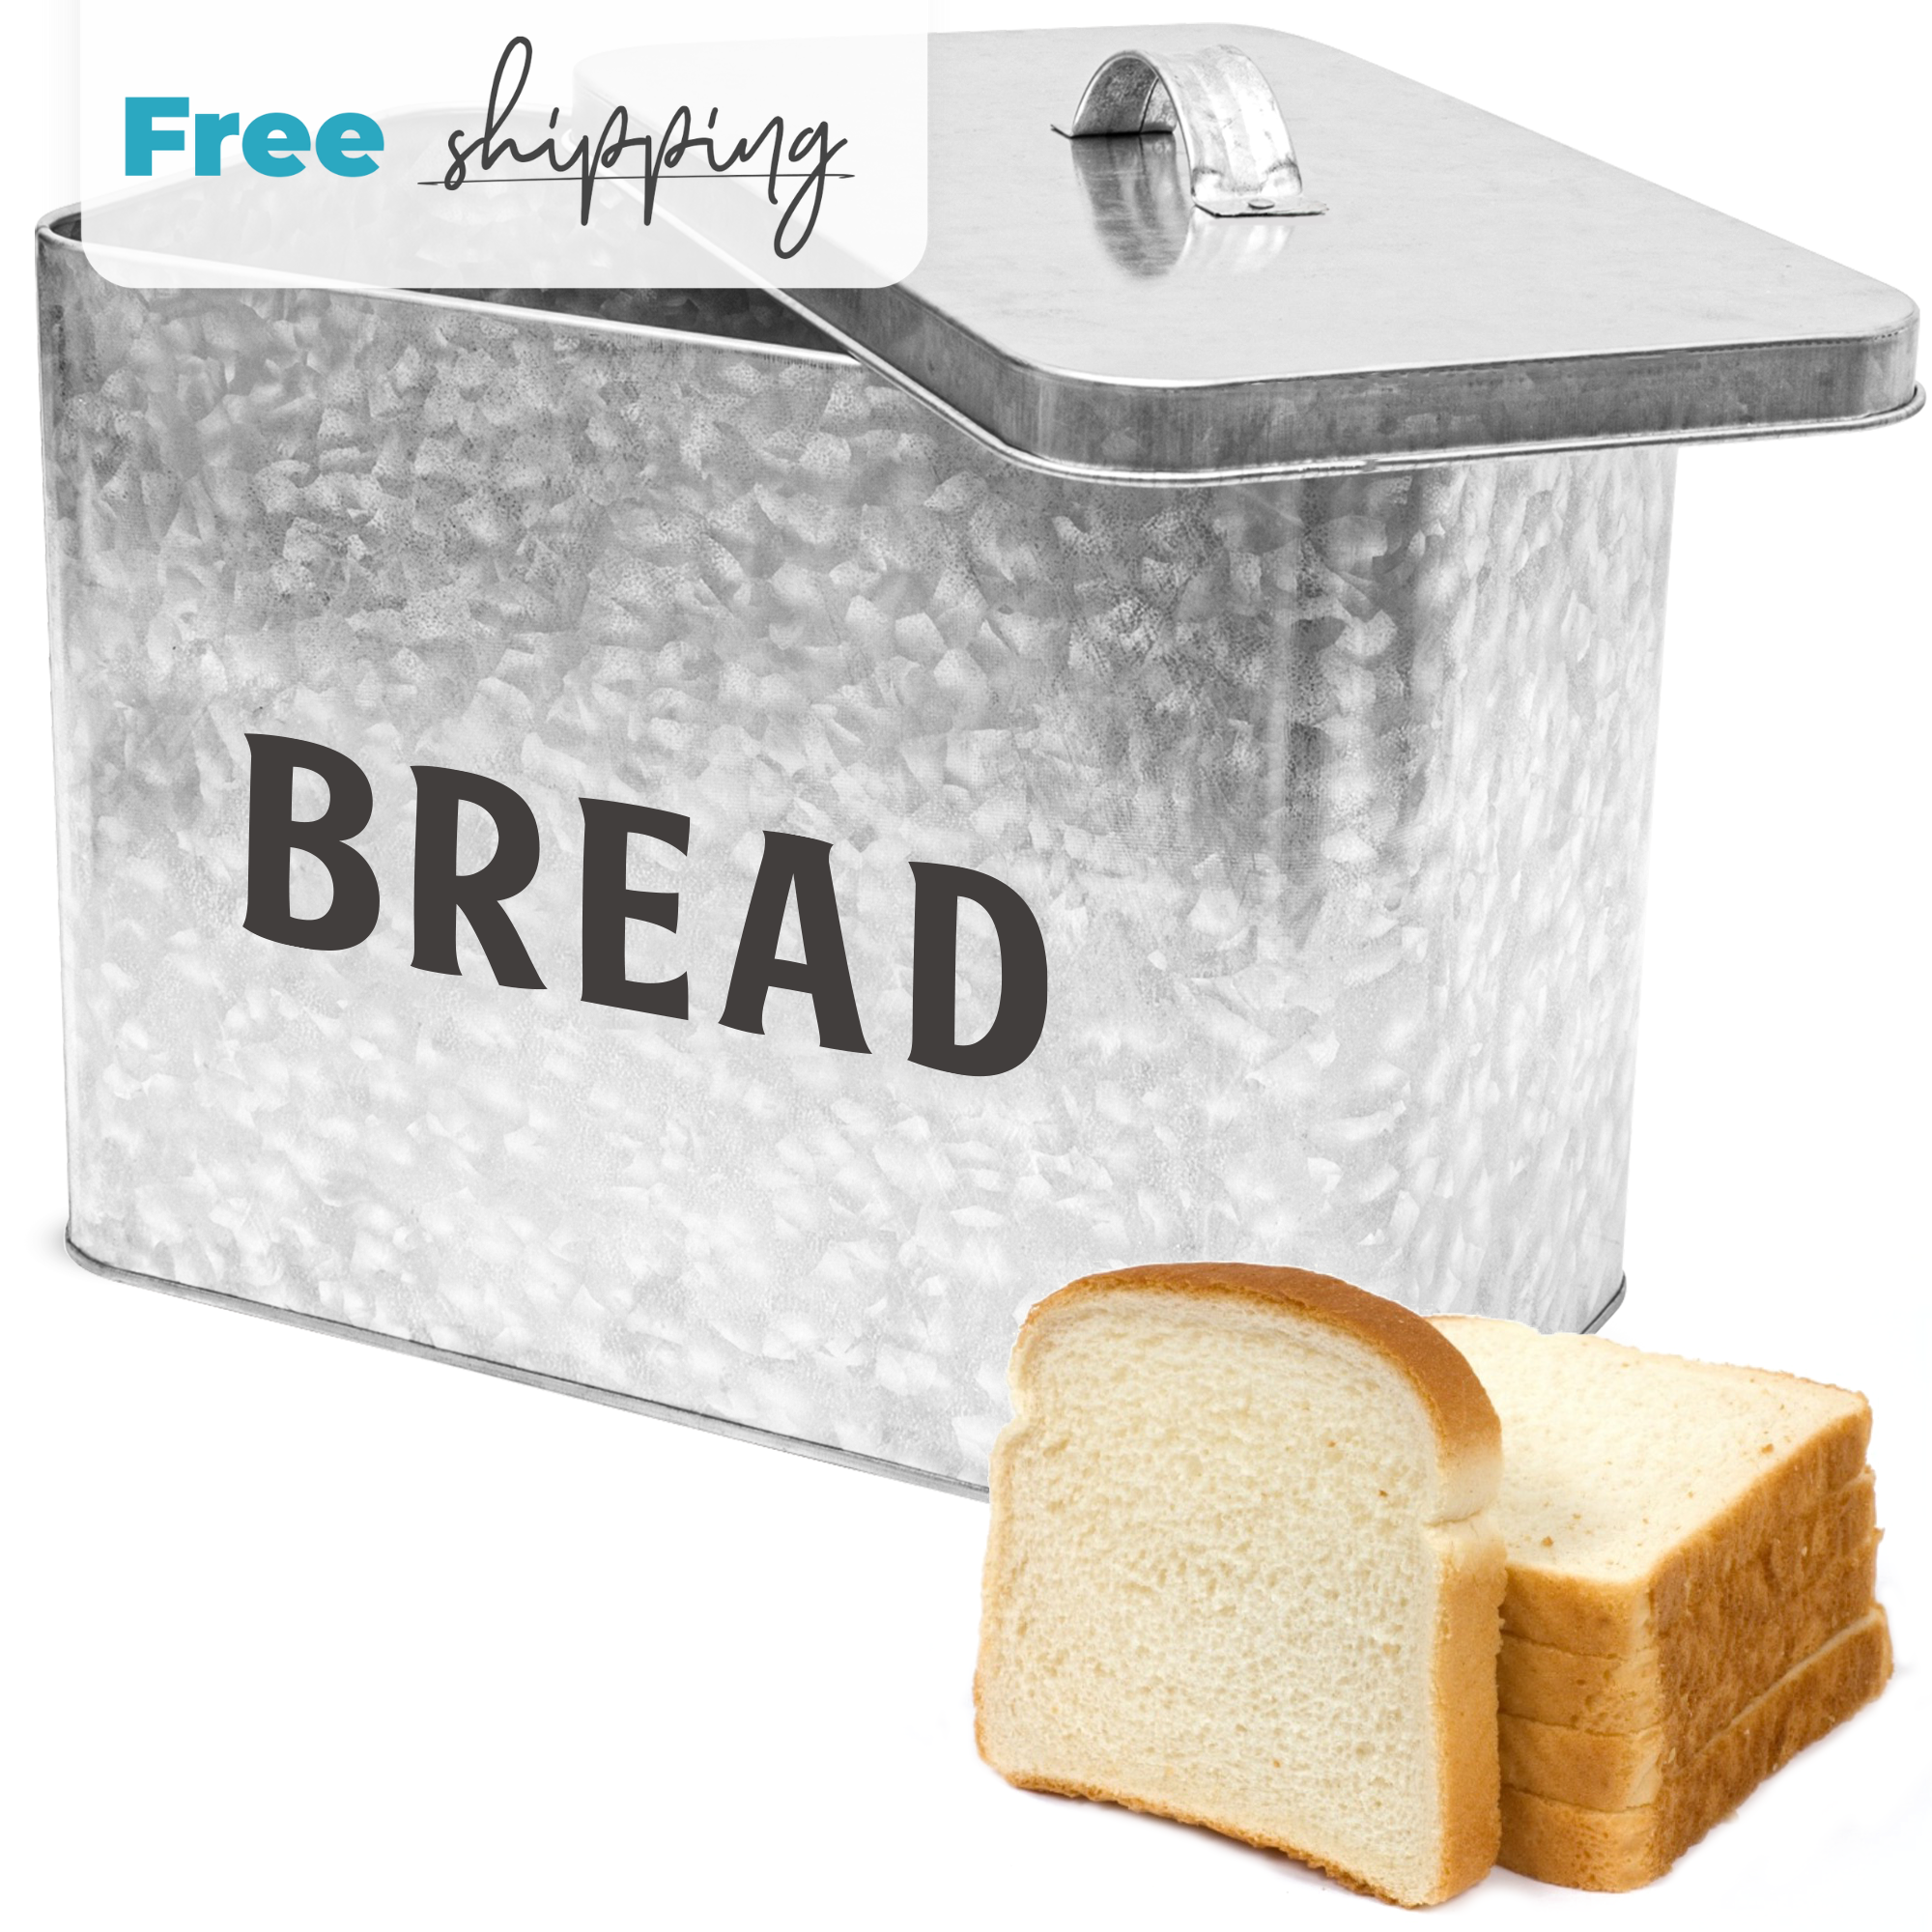 Galvanized Bread Box by Saratoga Home featuring extra sticker label and bread loaf in front